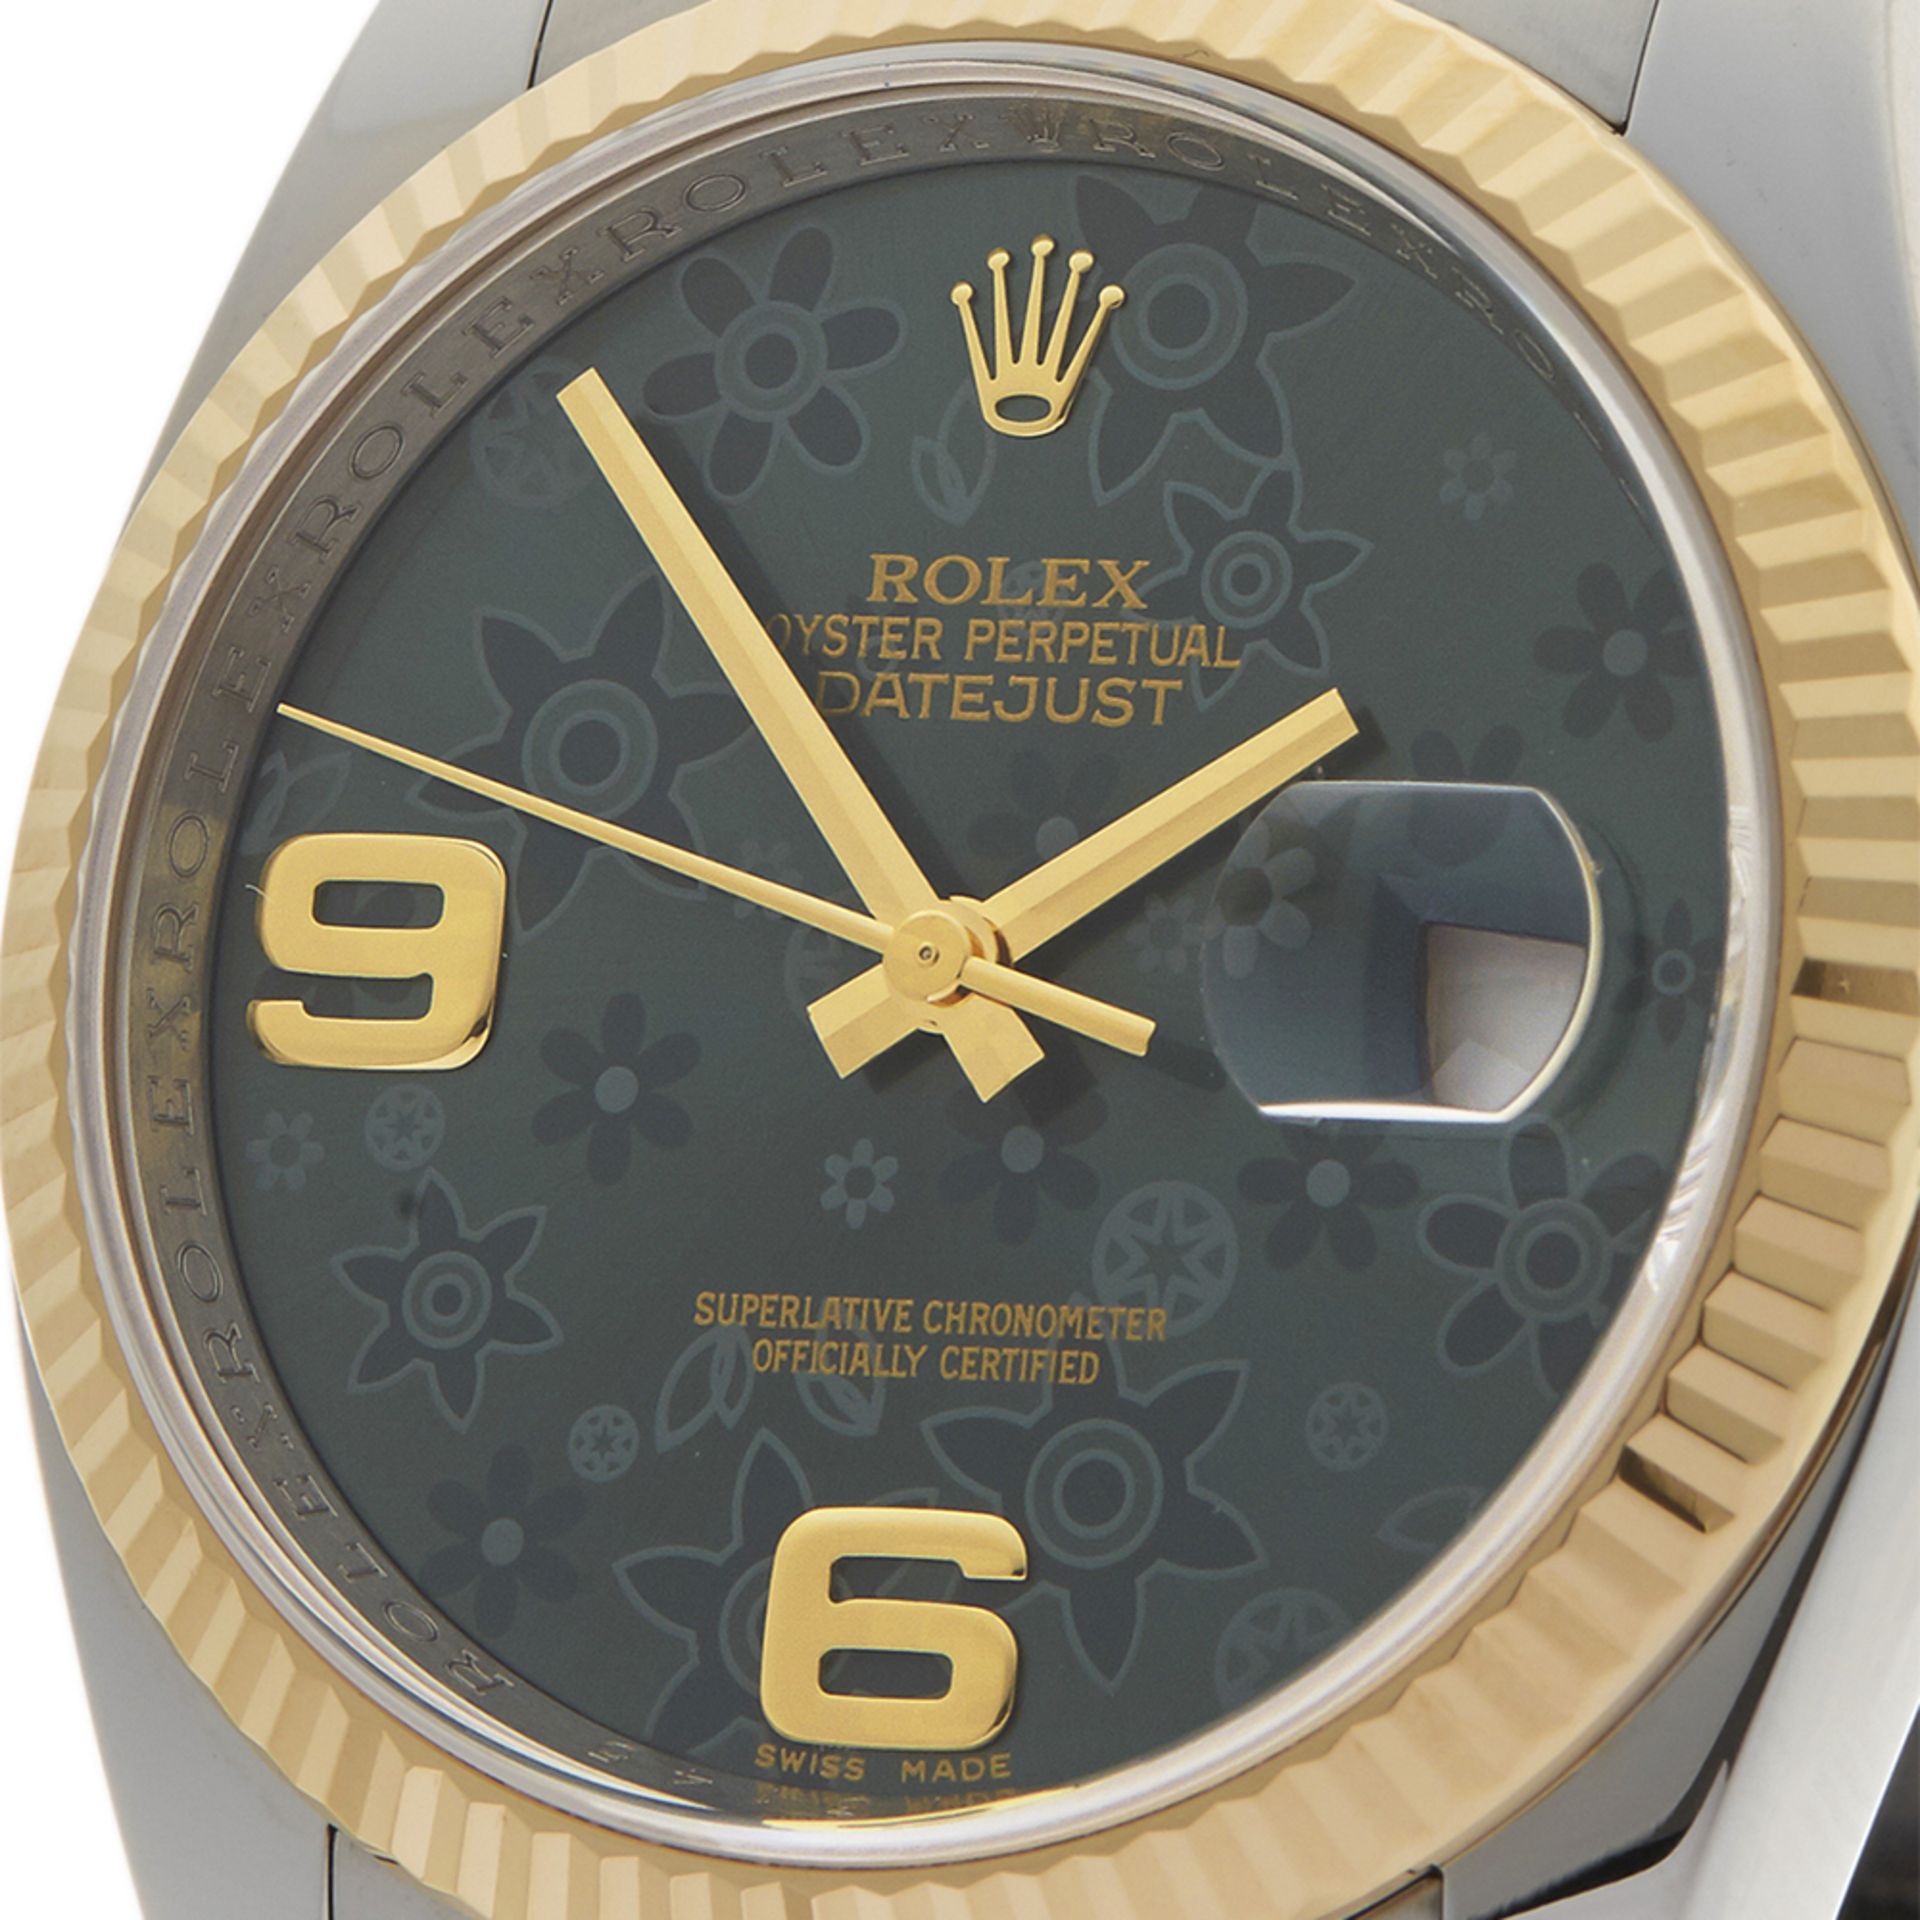 Datejust 36mm Stainless Steel & 18k Yellow Gold - 116233 - Image 3 of 9